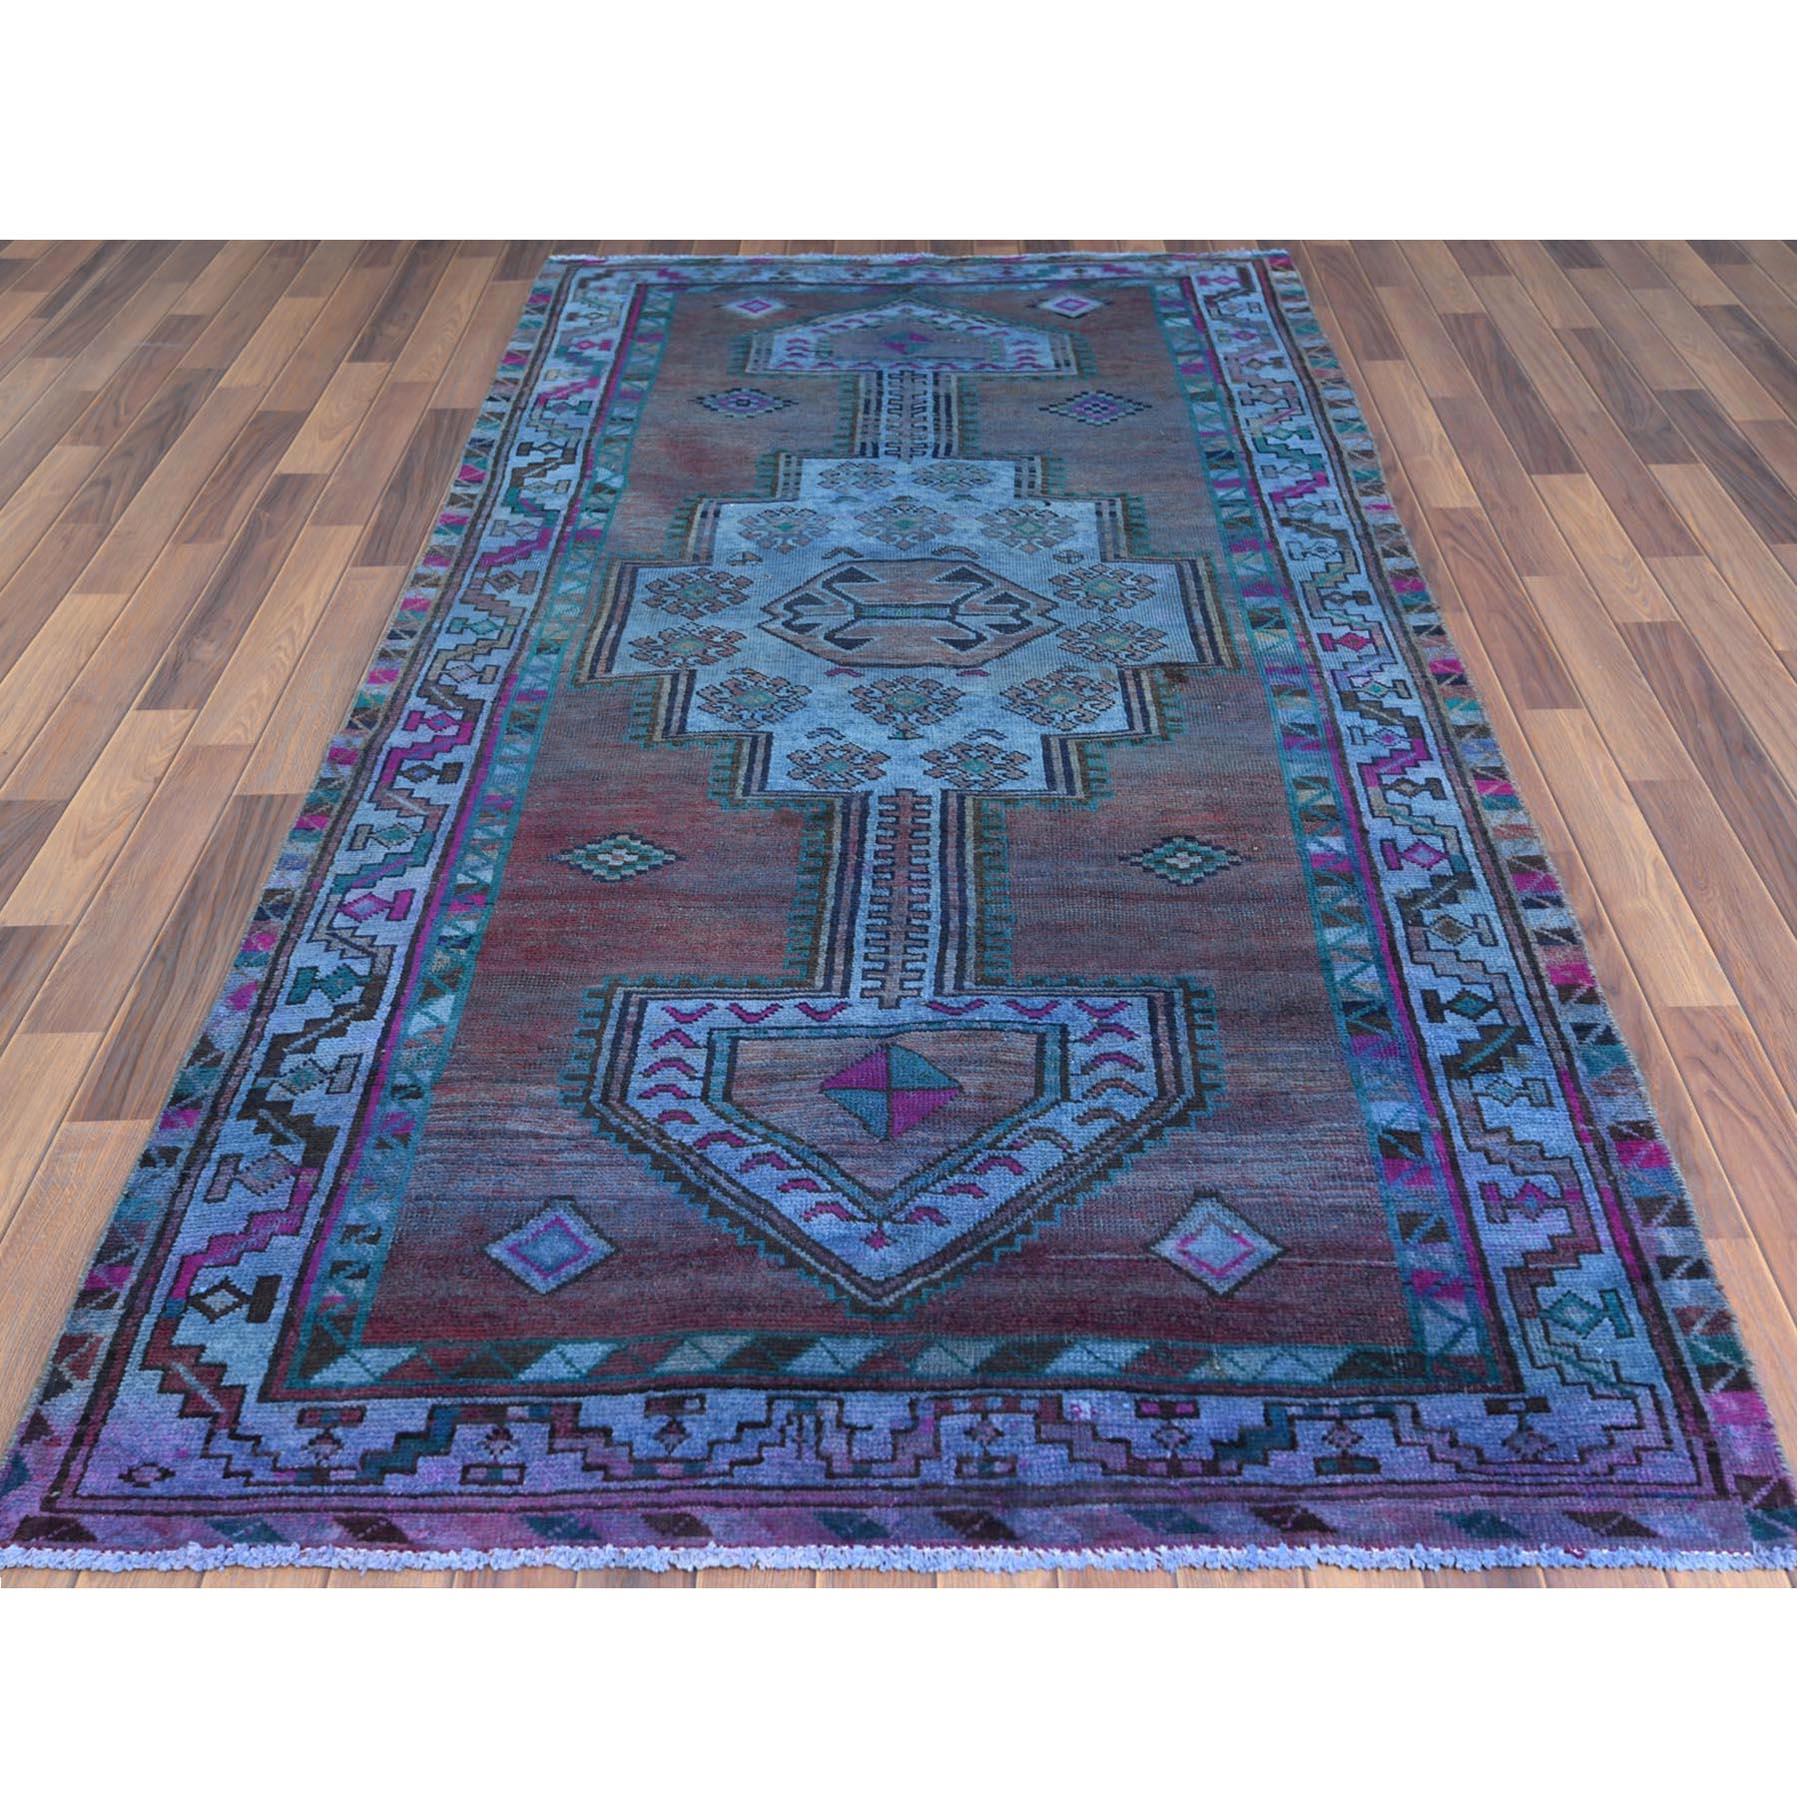 This fabulous hand-knotted carpet has been created and designed for extra strength and durability. This rug has been handcrafted for weeks in the traditional method that is used to make
Exact Rug Size in Feet and Inches : 4'8